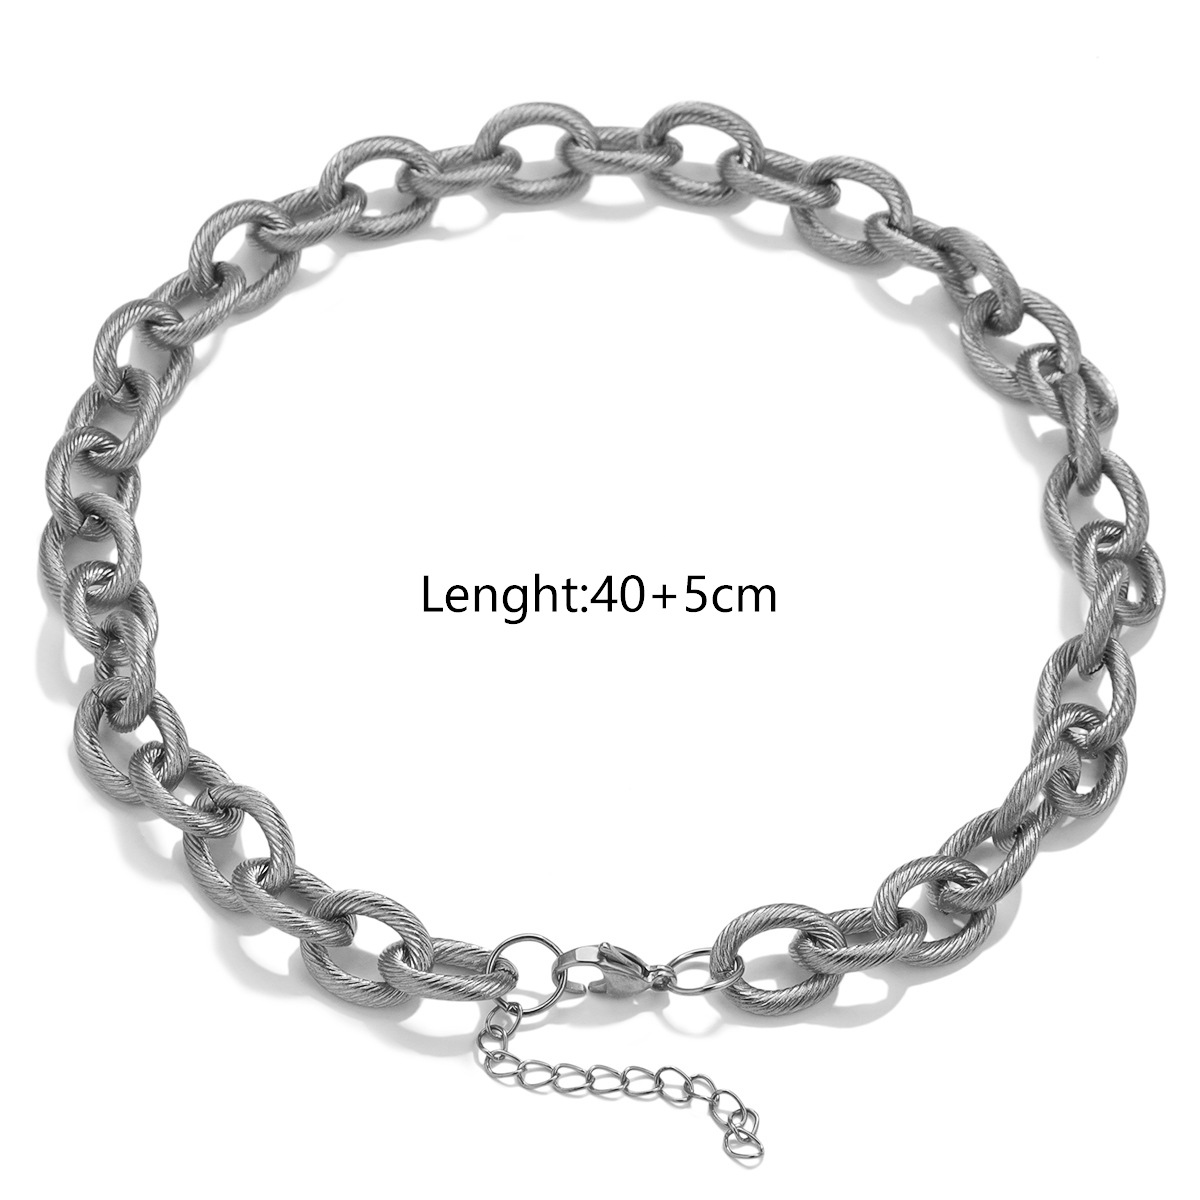 2:Steel necklace-40cm tail chain 5cm